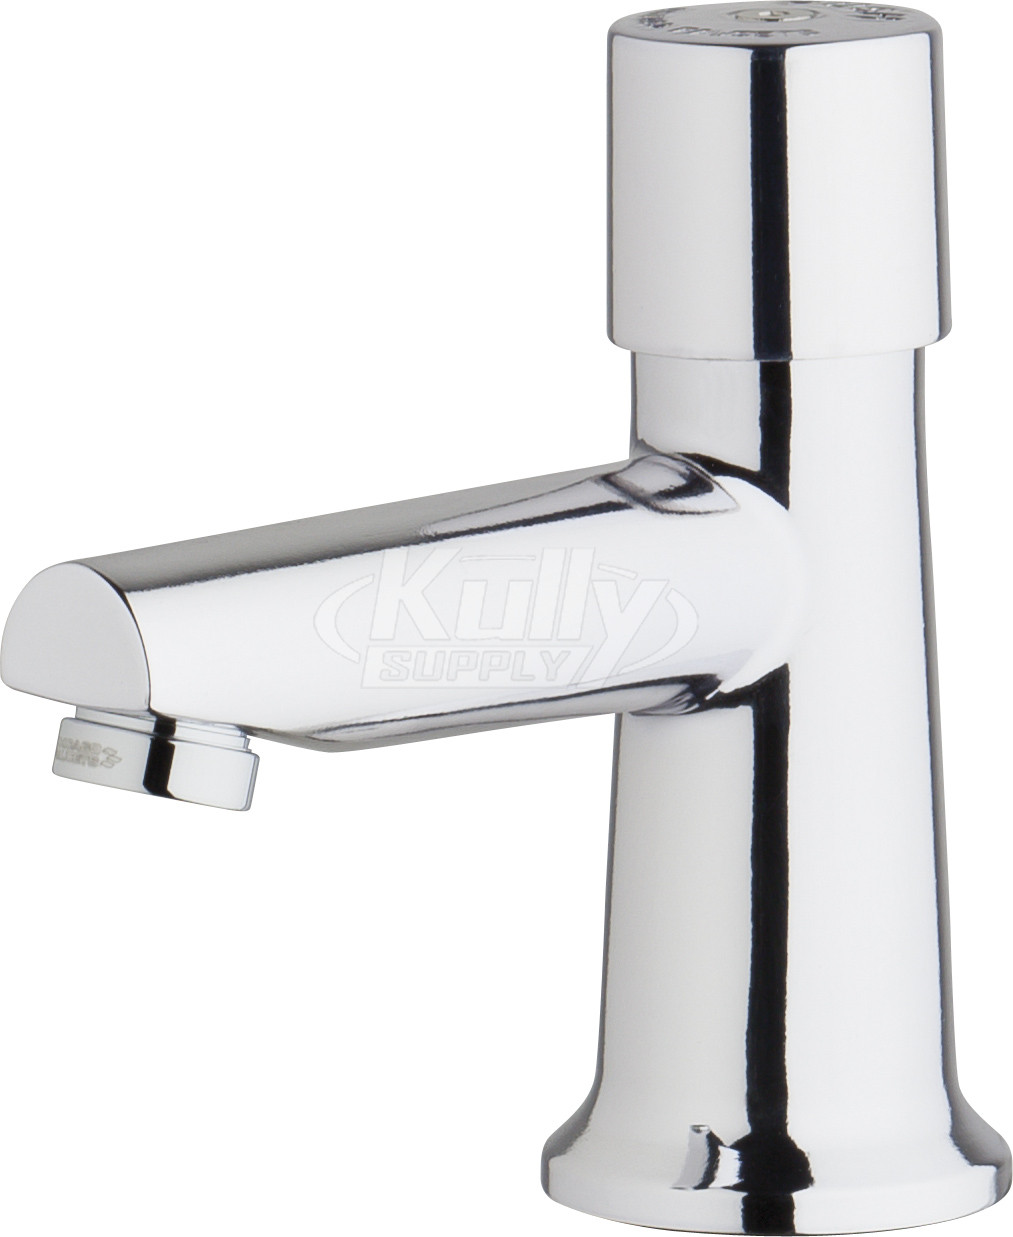 Chicago 3500-E2805ABCP Lavatory Metering Faucet